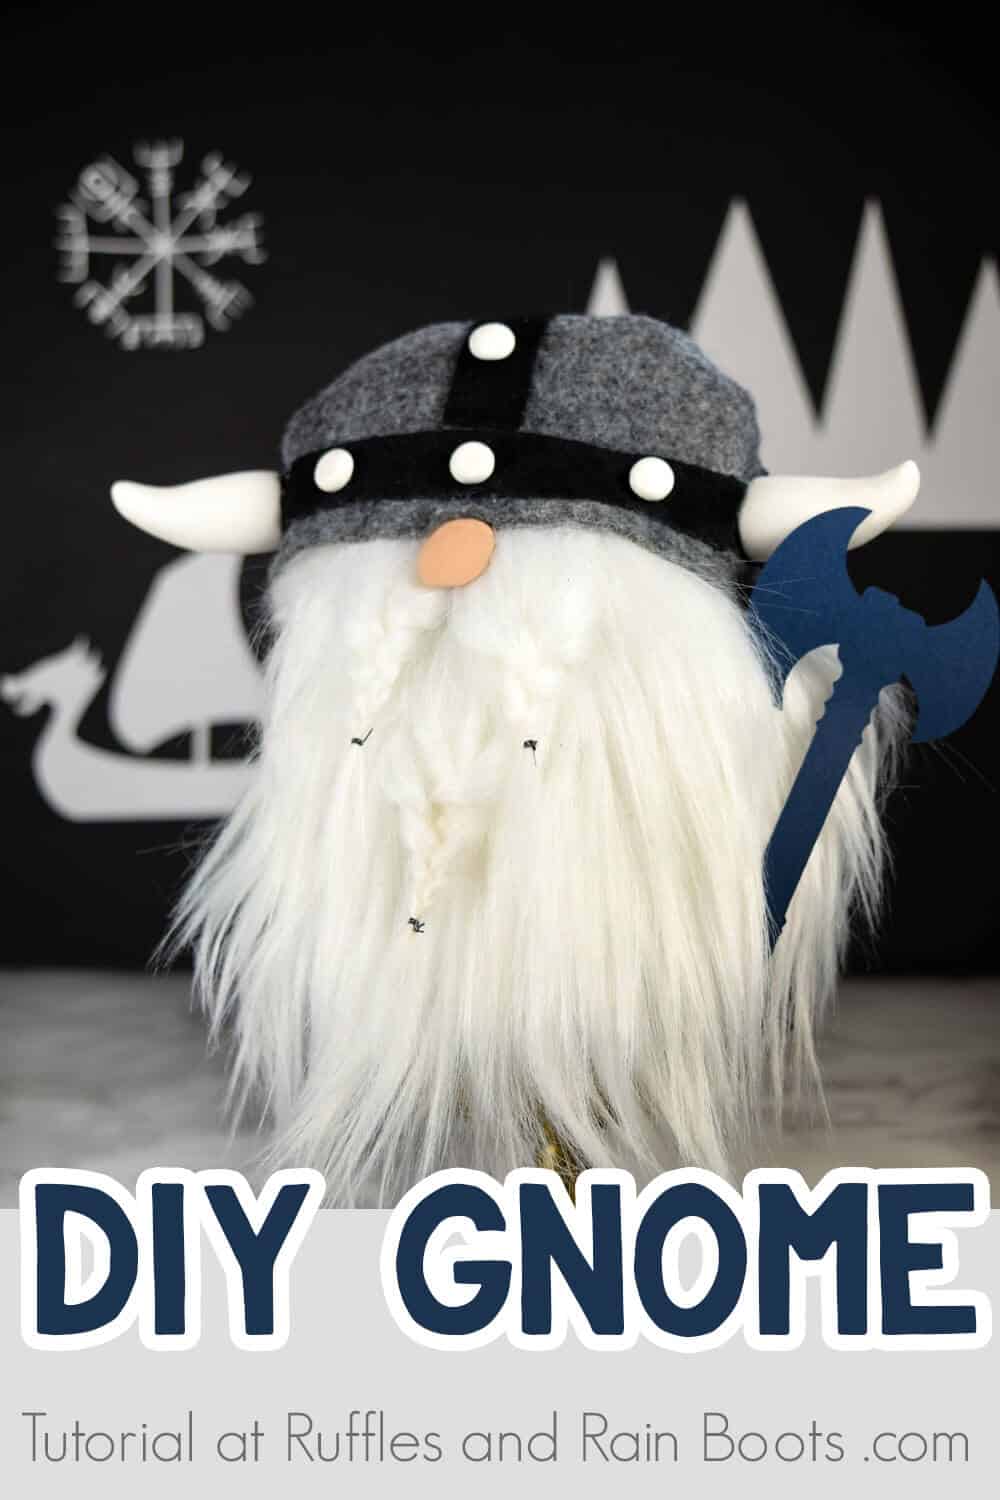 Viking gnome on dark background with text which reads DIY gnome